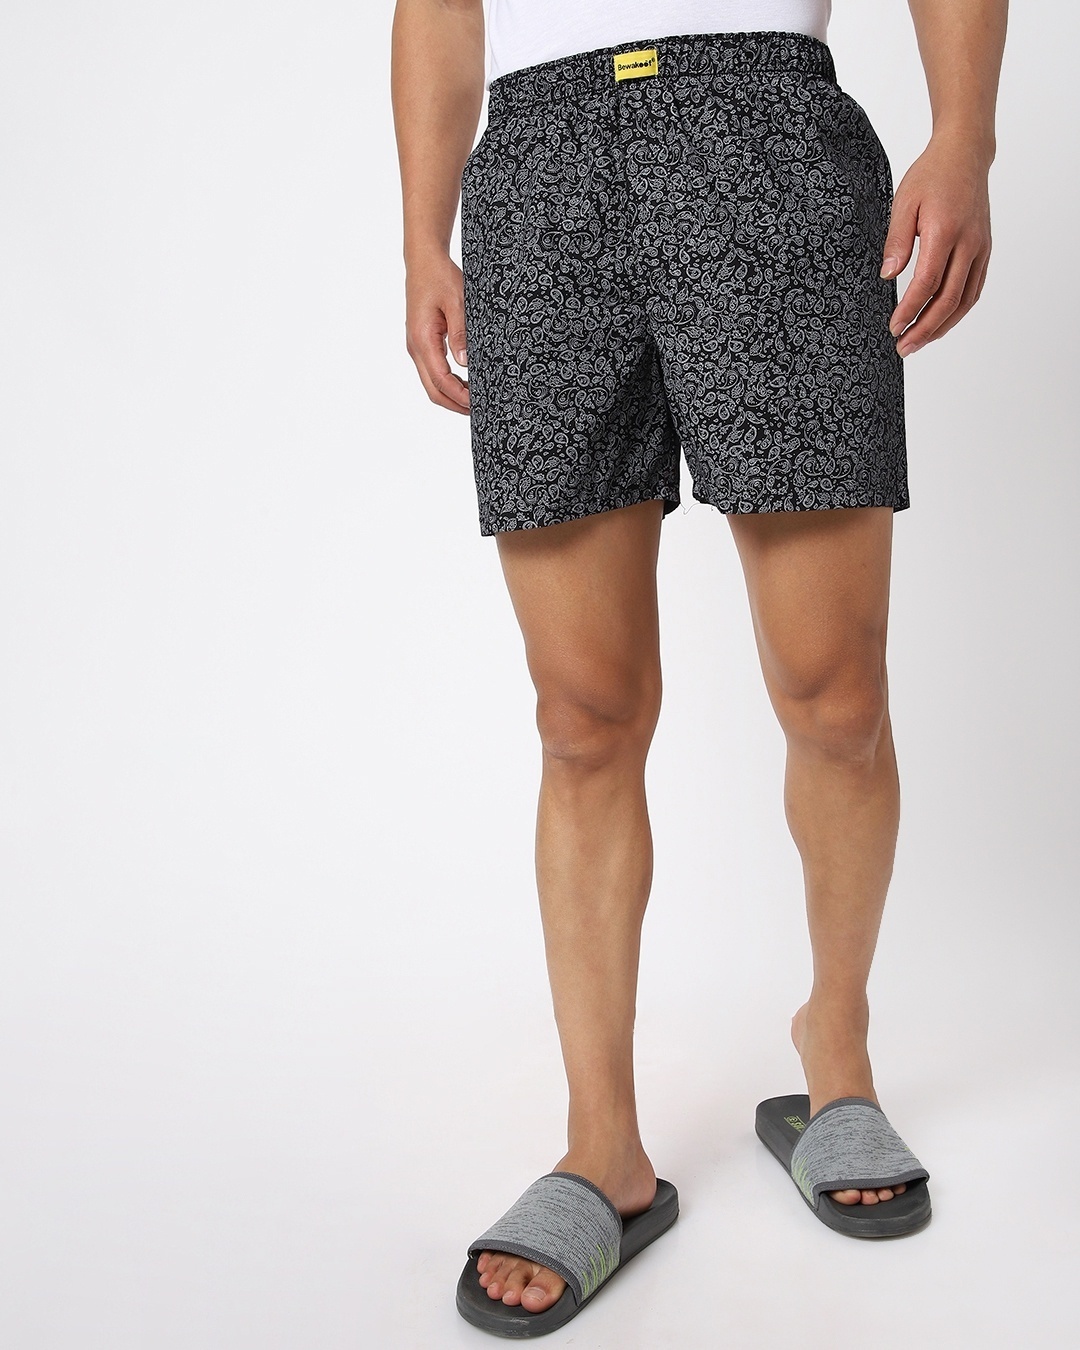 Men's Black All Over Printed Boxers